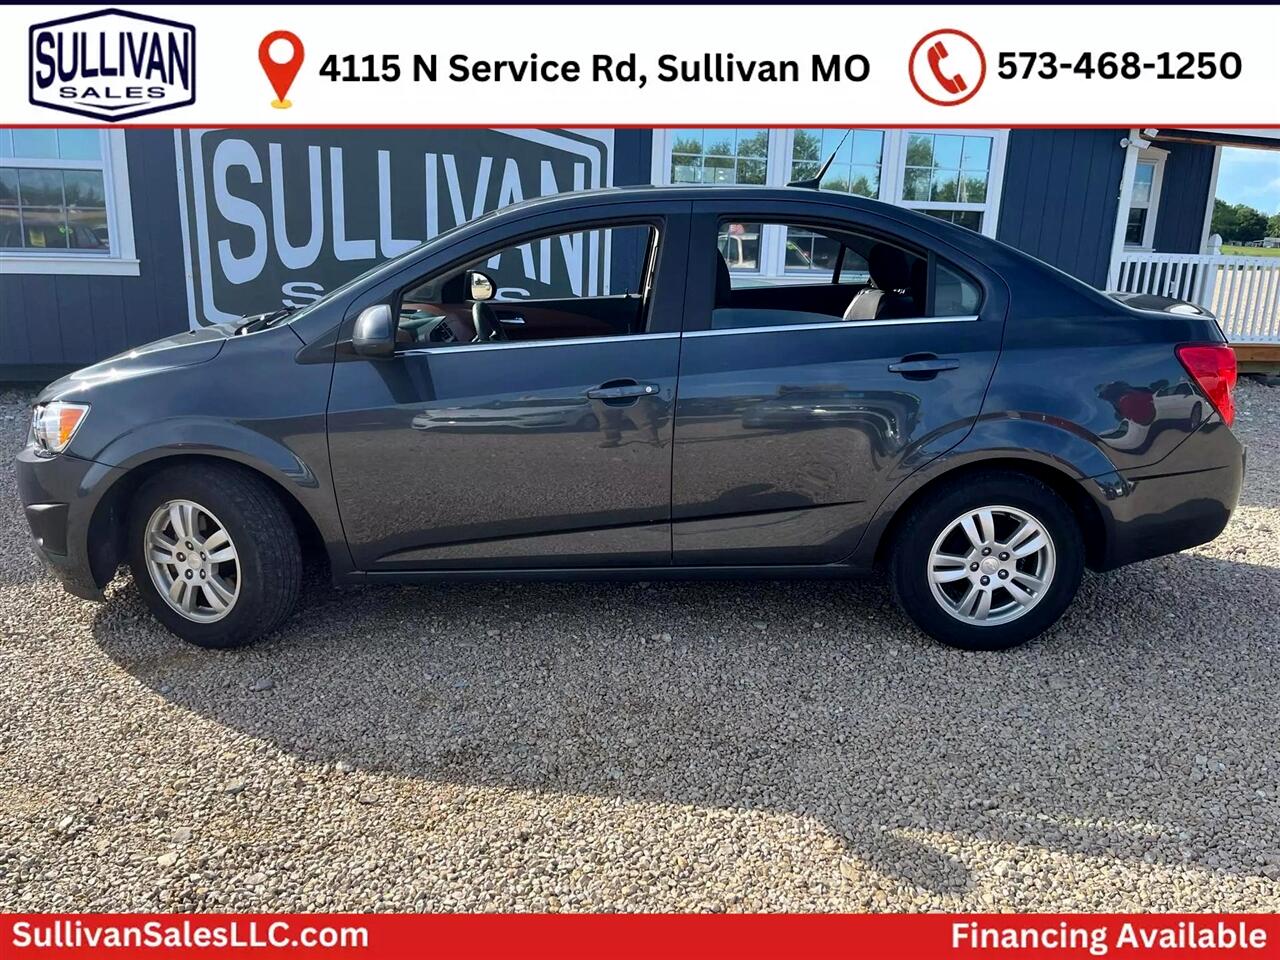 Used 2013 Chevrolet Sonic LT with VIN 1G1JC5SB3D4195333 for sale in Sullivan, MO